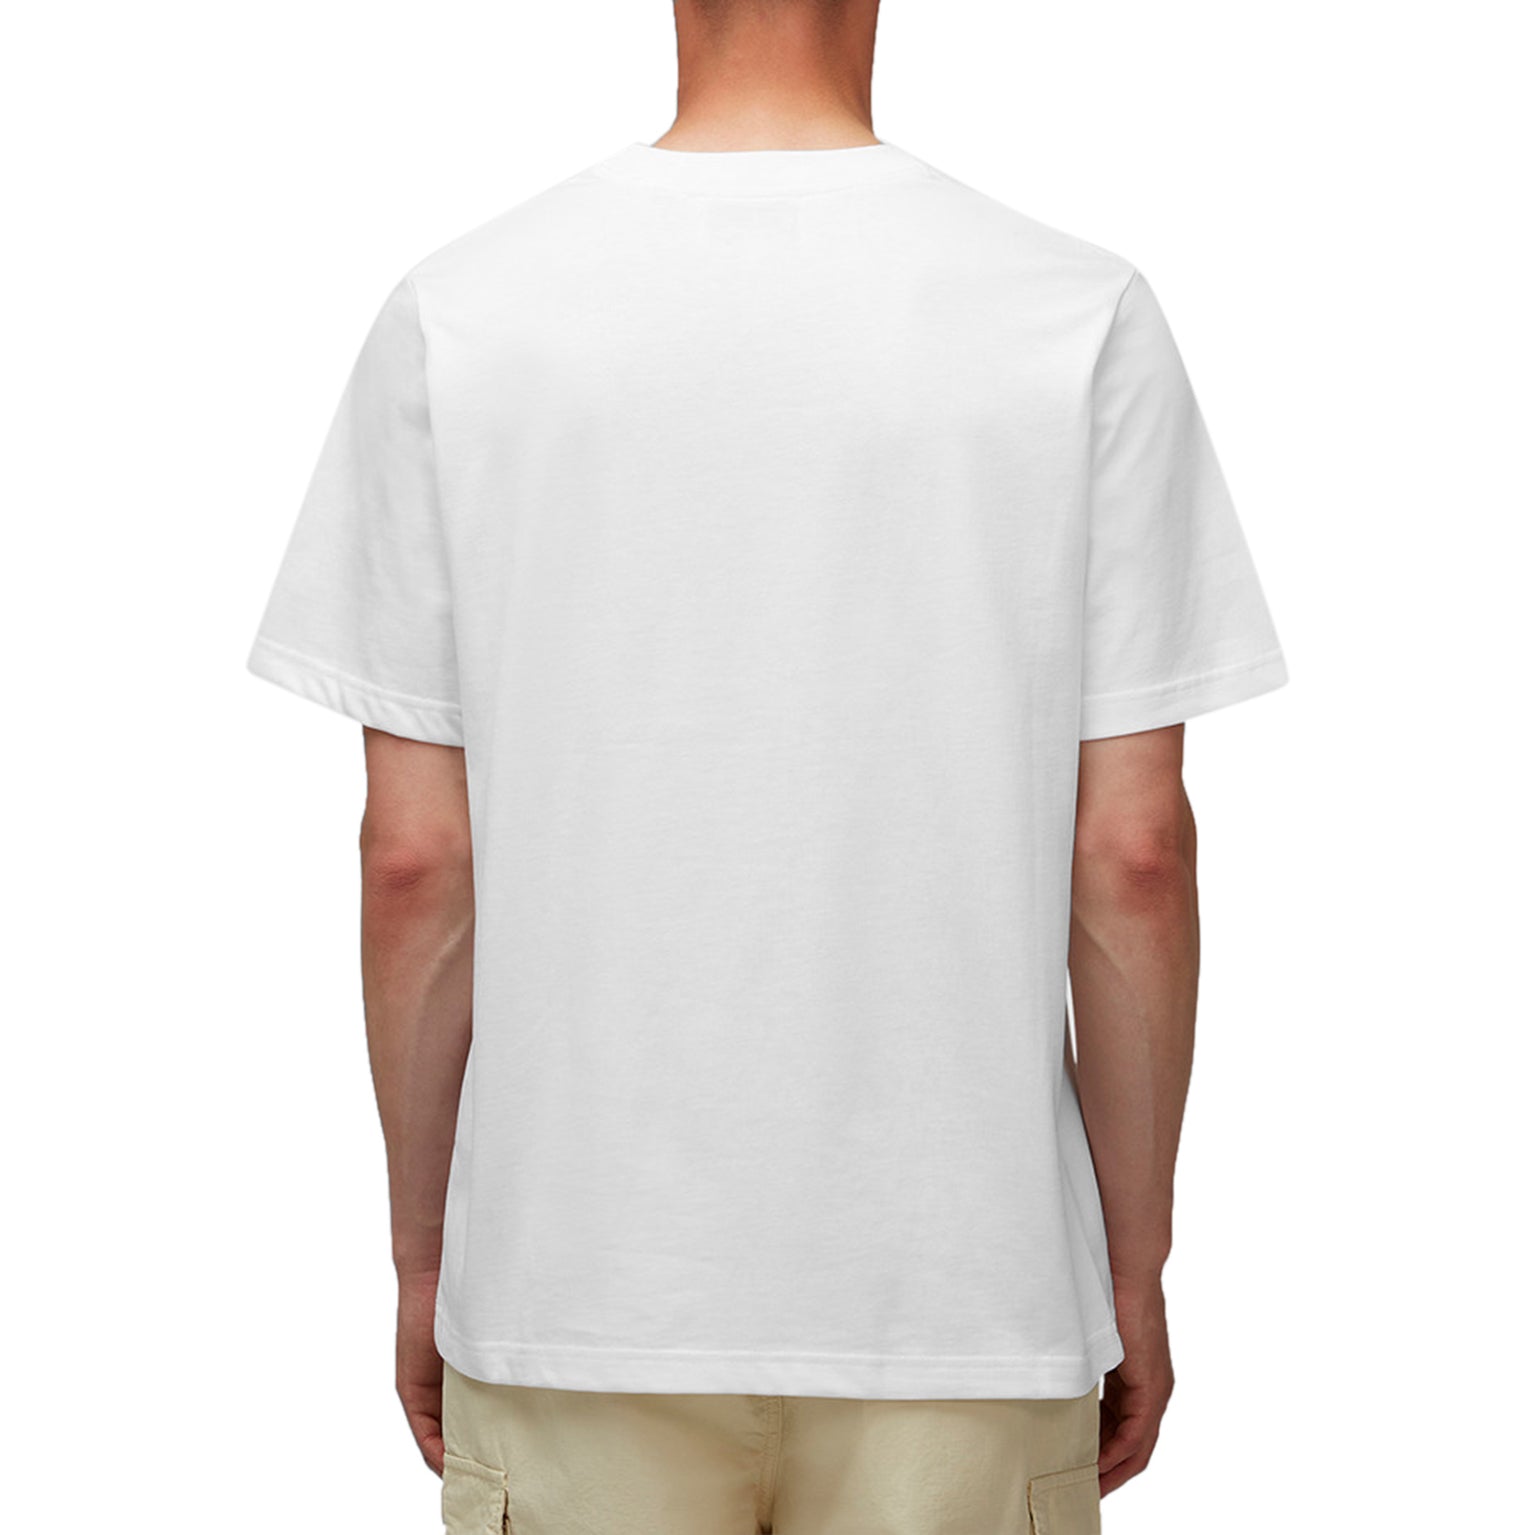 Mode back view of Casablanca Tennis Club Printed T Shirt White Pastelle MF23-JTS-001-13